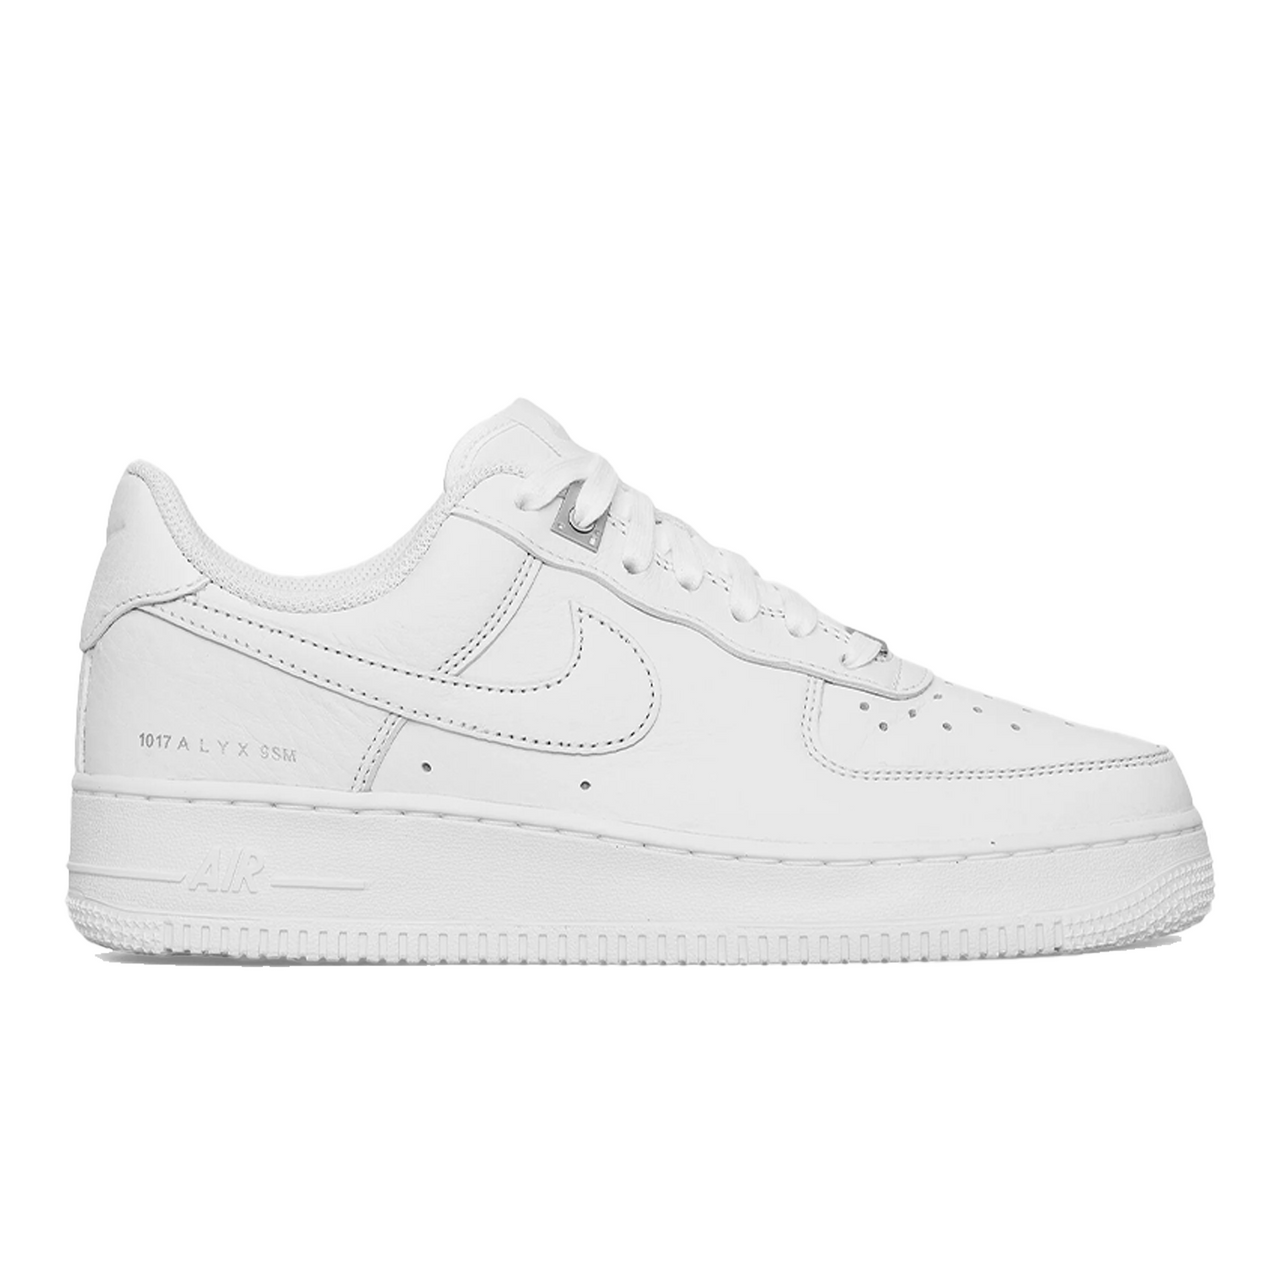 Nike x 1017 Alyx Air Force 1 SP Low White (2023)